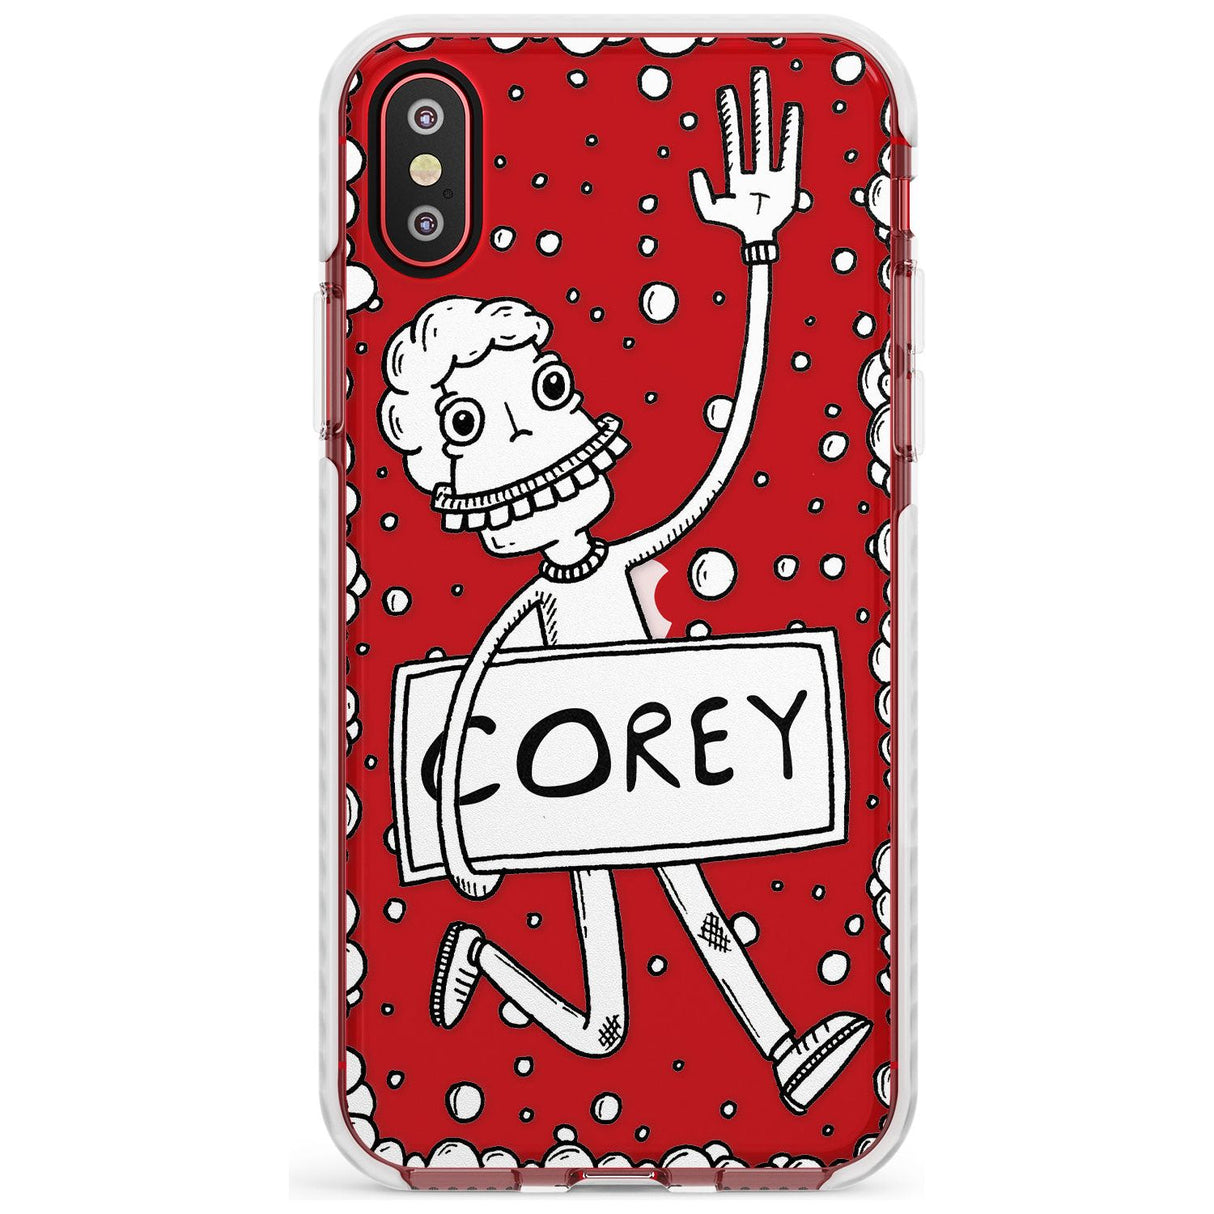 Personalised Custom Banner Boy Impact Phone Case for iPhone X XS Max XR